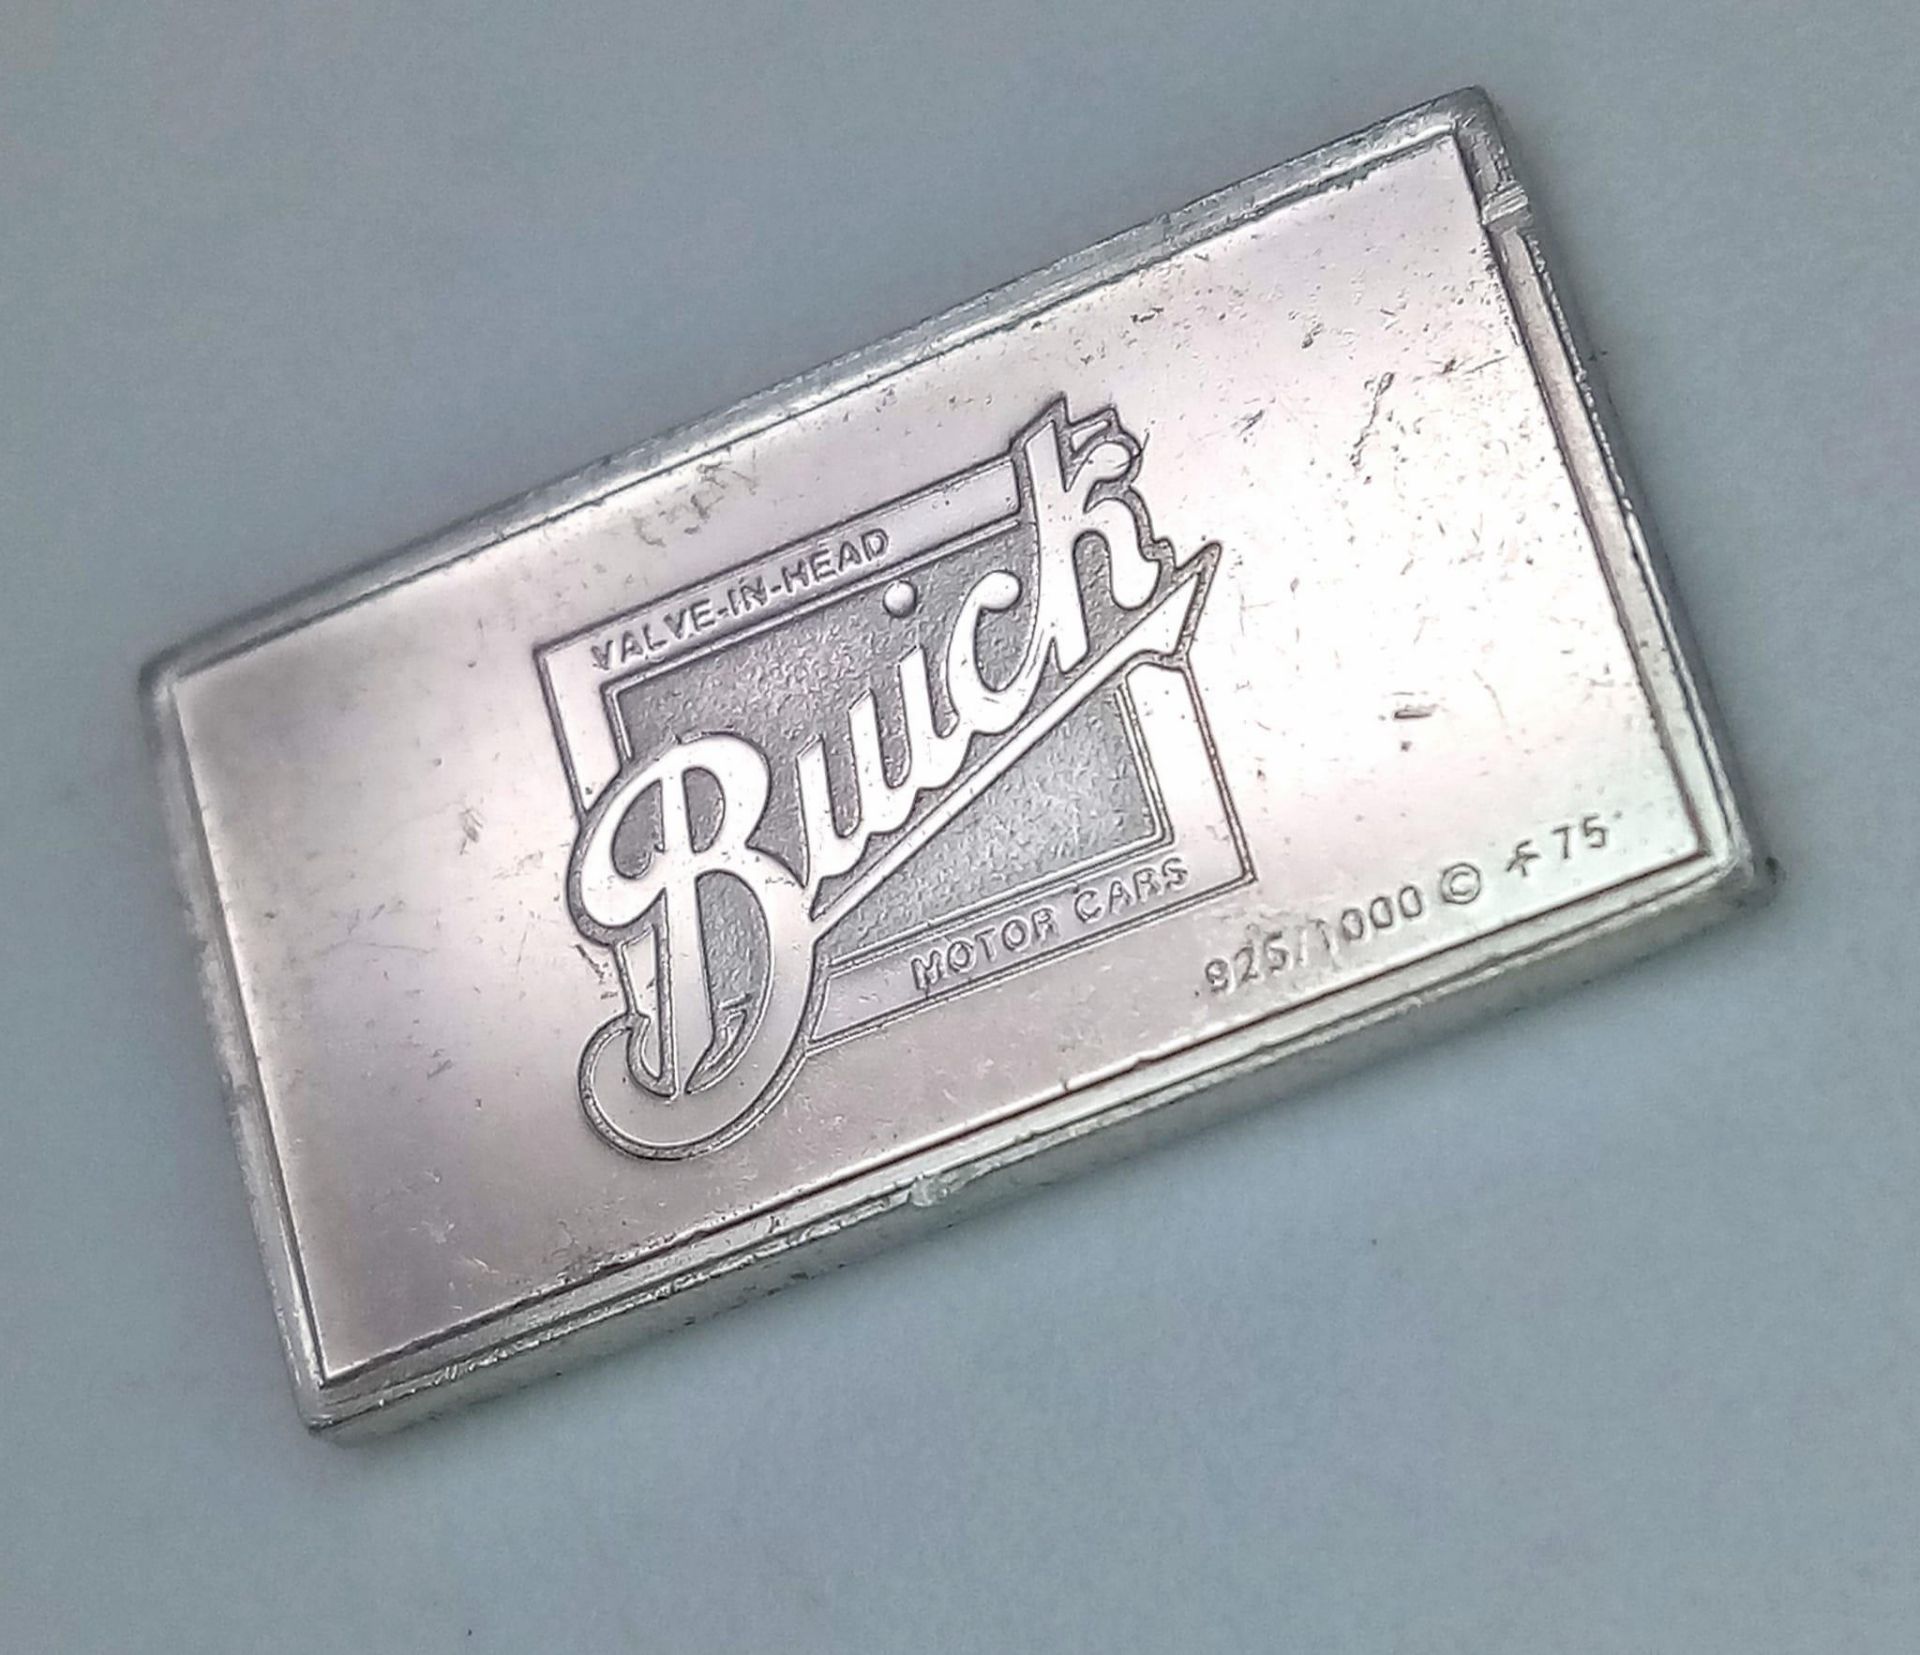 2 X STERLING SILVER AND ENAMEL BUICK CAR LOGO MANUFACTURER PLAQUES, MADE IN UNITED STATES USA, - Image 6 of 11